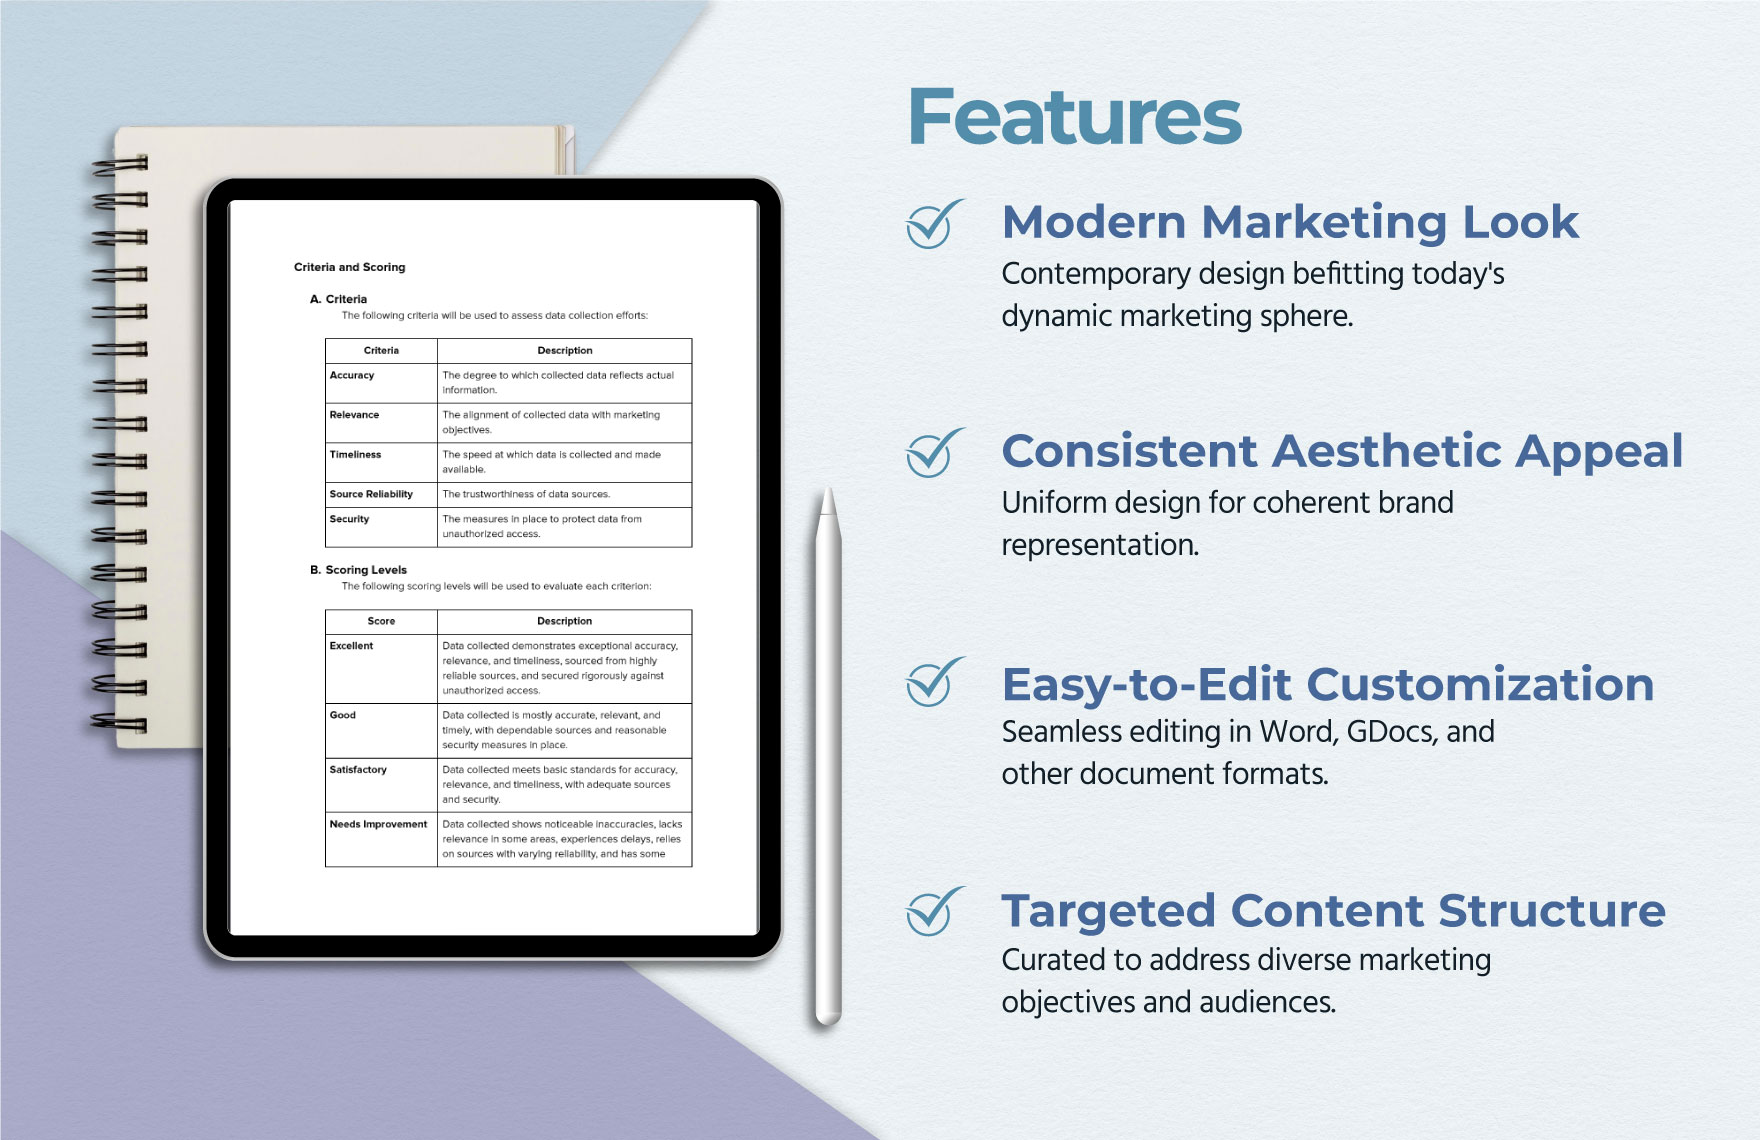 Marketing Data Collection Rubric Template